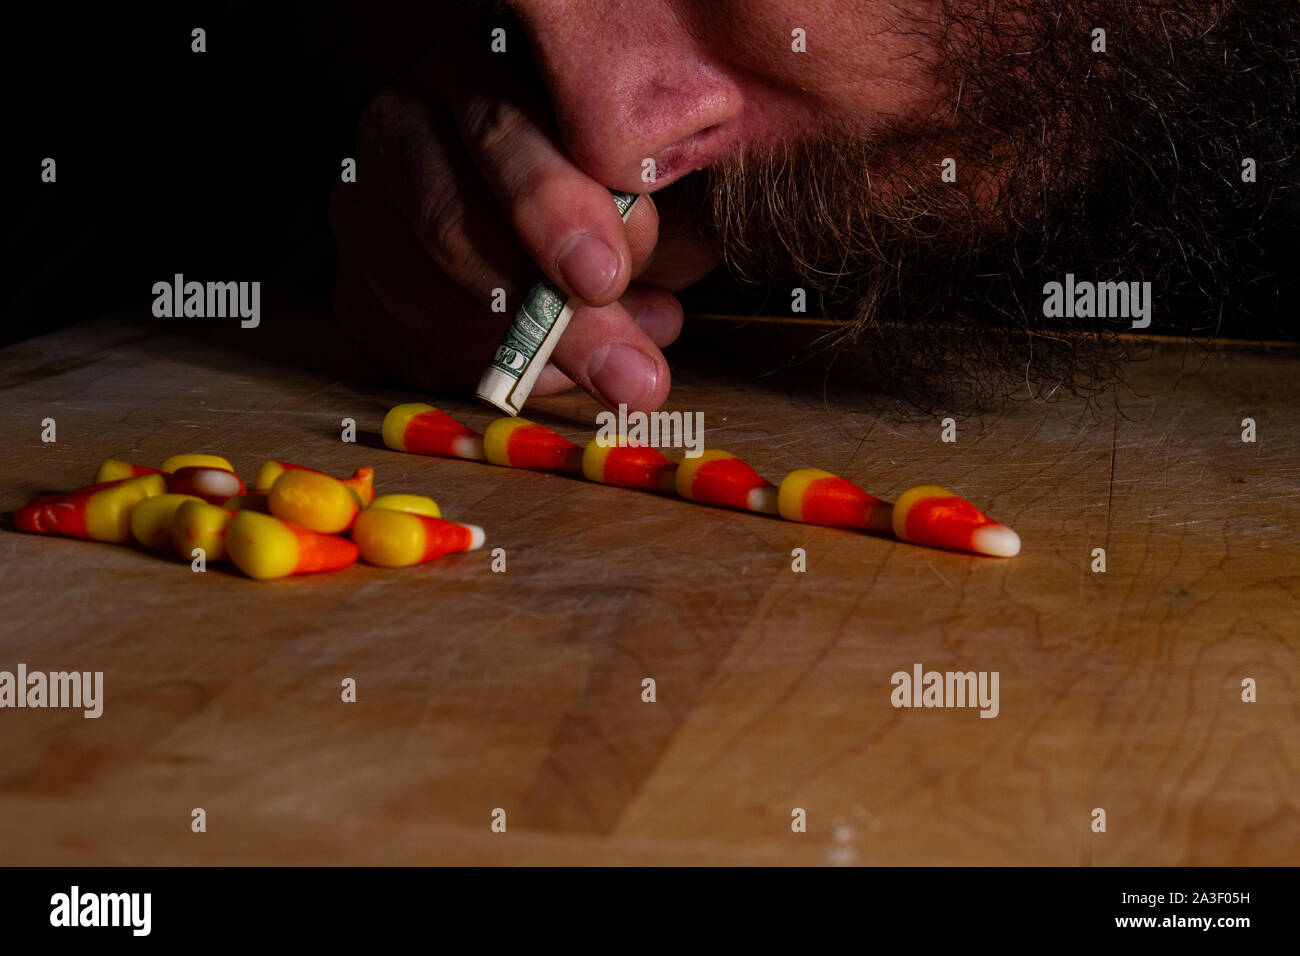 Man snorting candy corn during halloween time Stock Photo